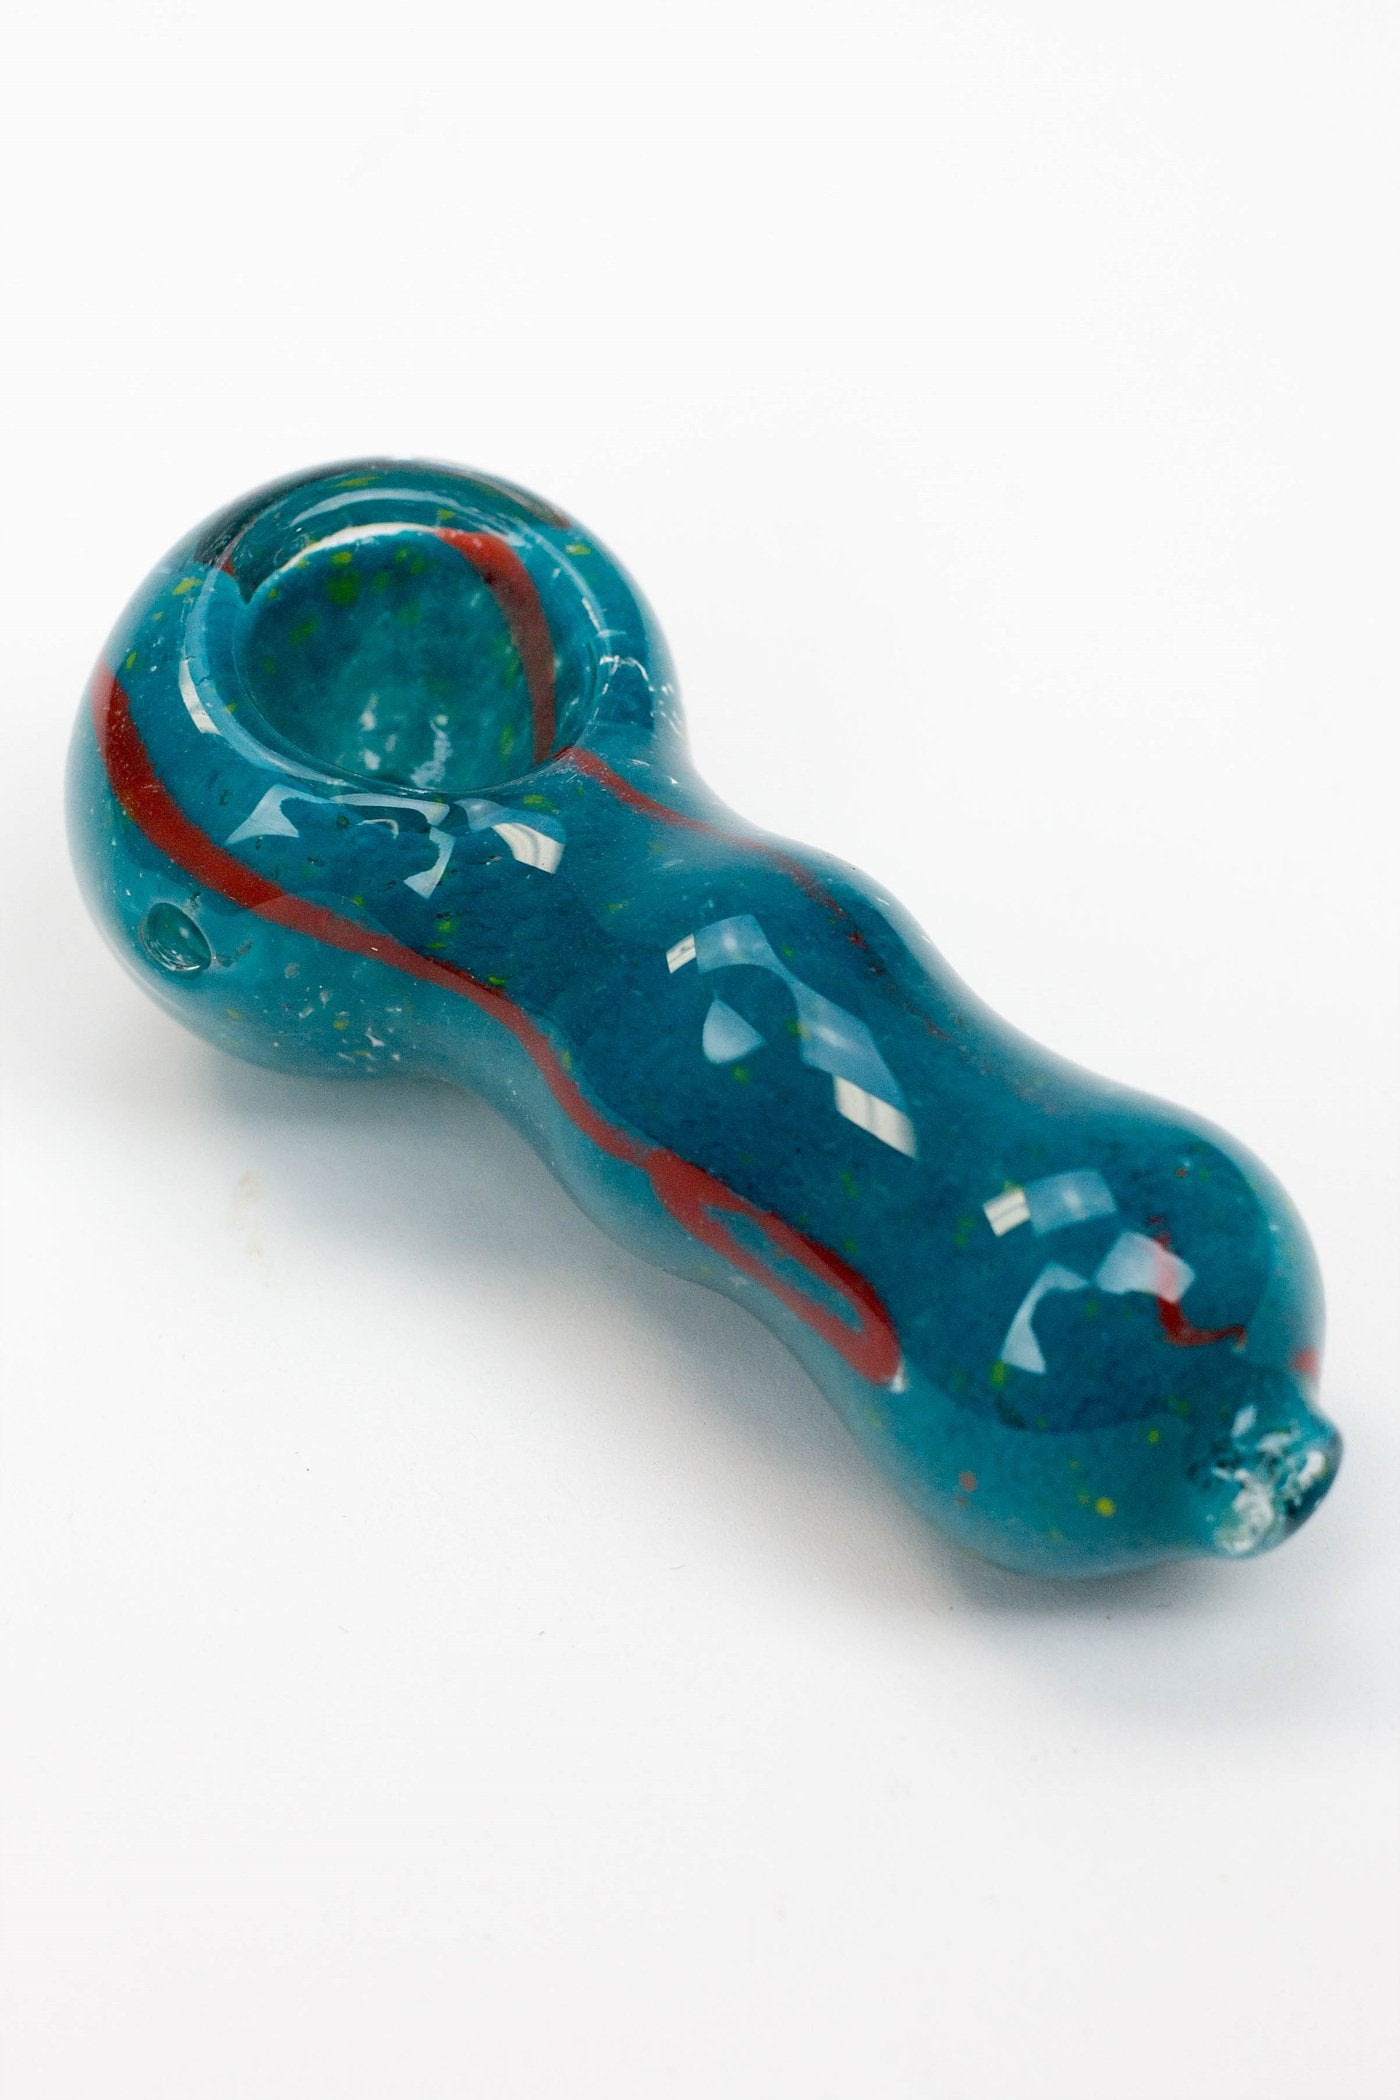 3" Soft glass hand pipe Flower Power Packages 